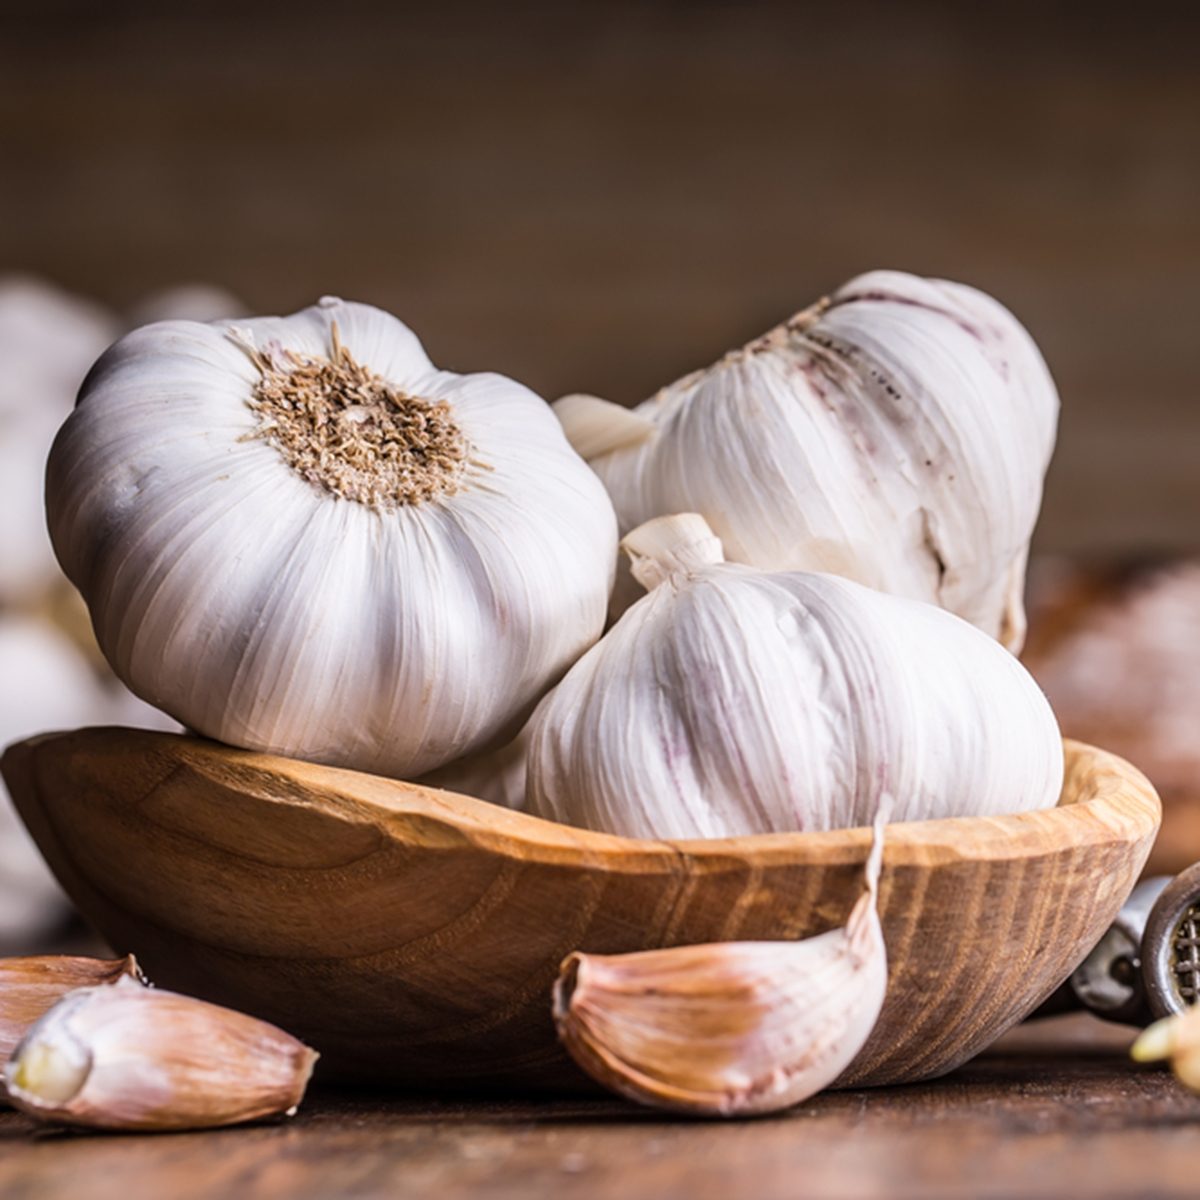 Image of Garlic cloves in a bowl